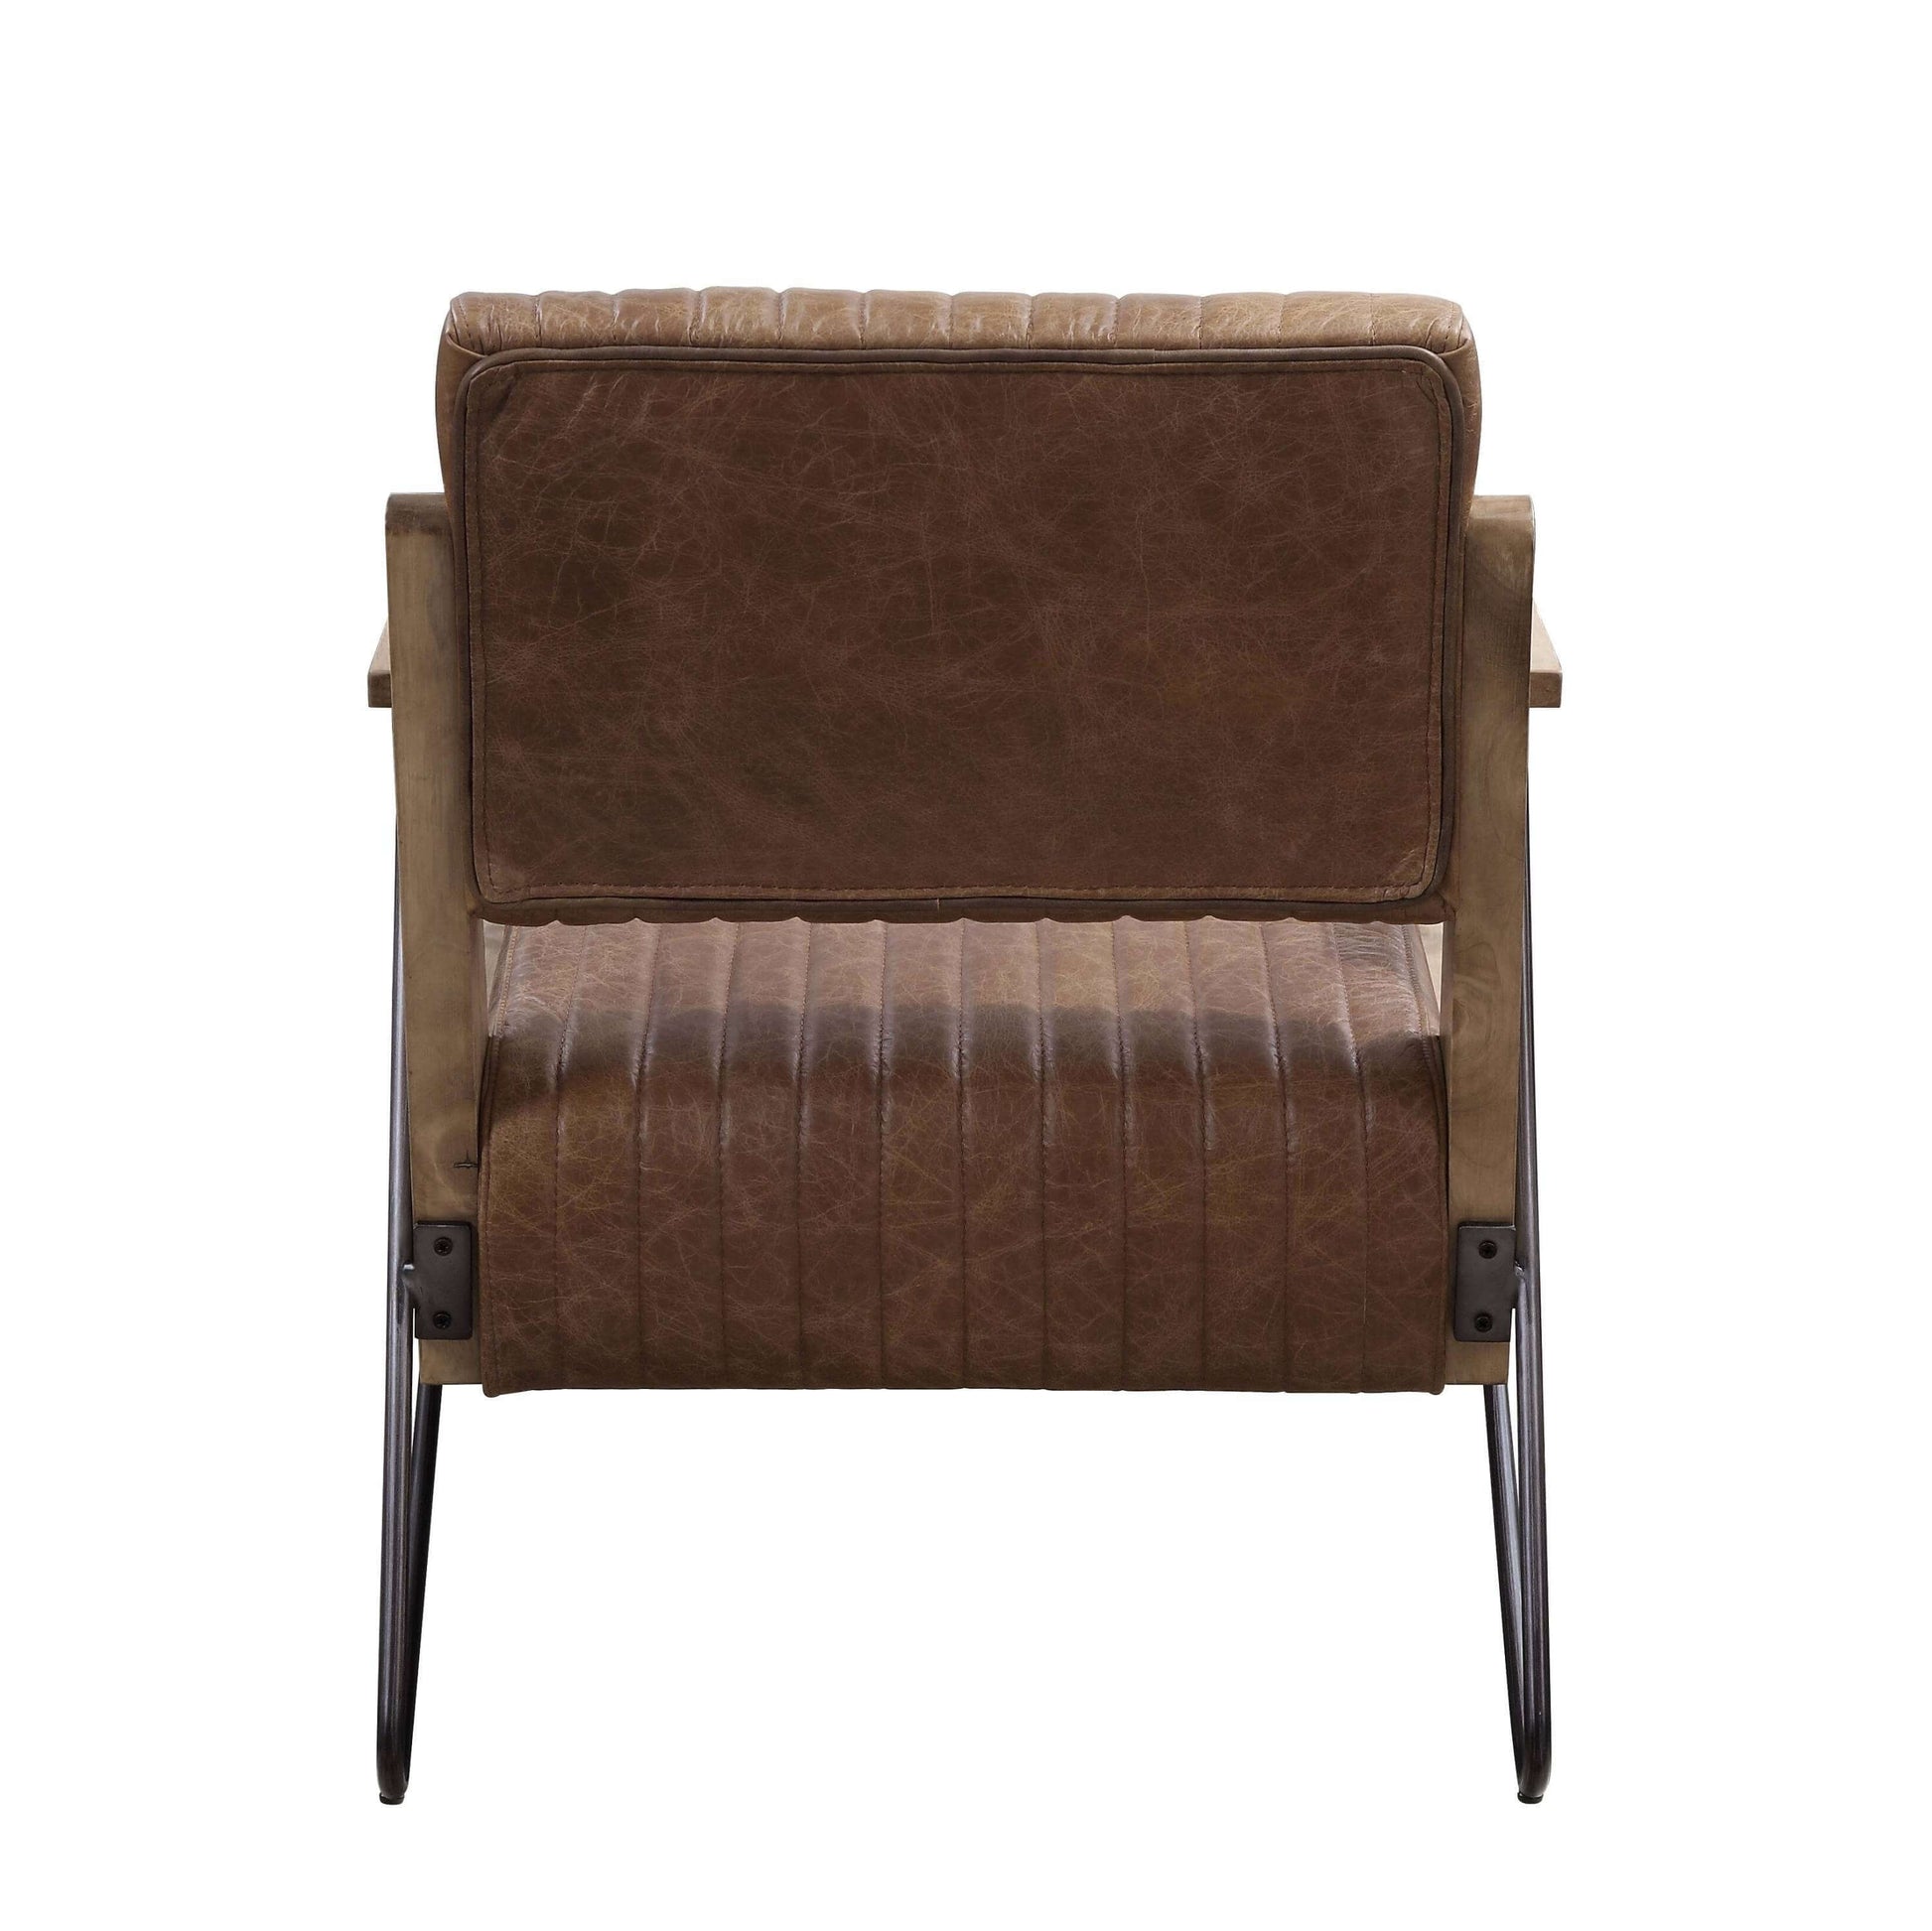 Eacnlz Accent Lounge Chair in Tufted Cocoa Leather & Matte Iron Finish Legs - Revel Sofa 